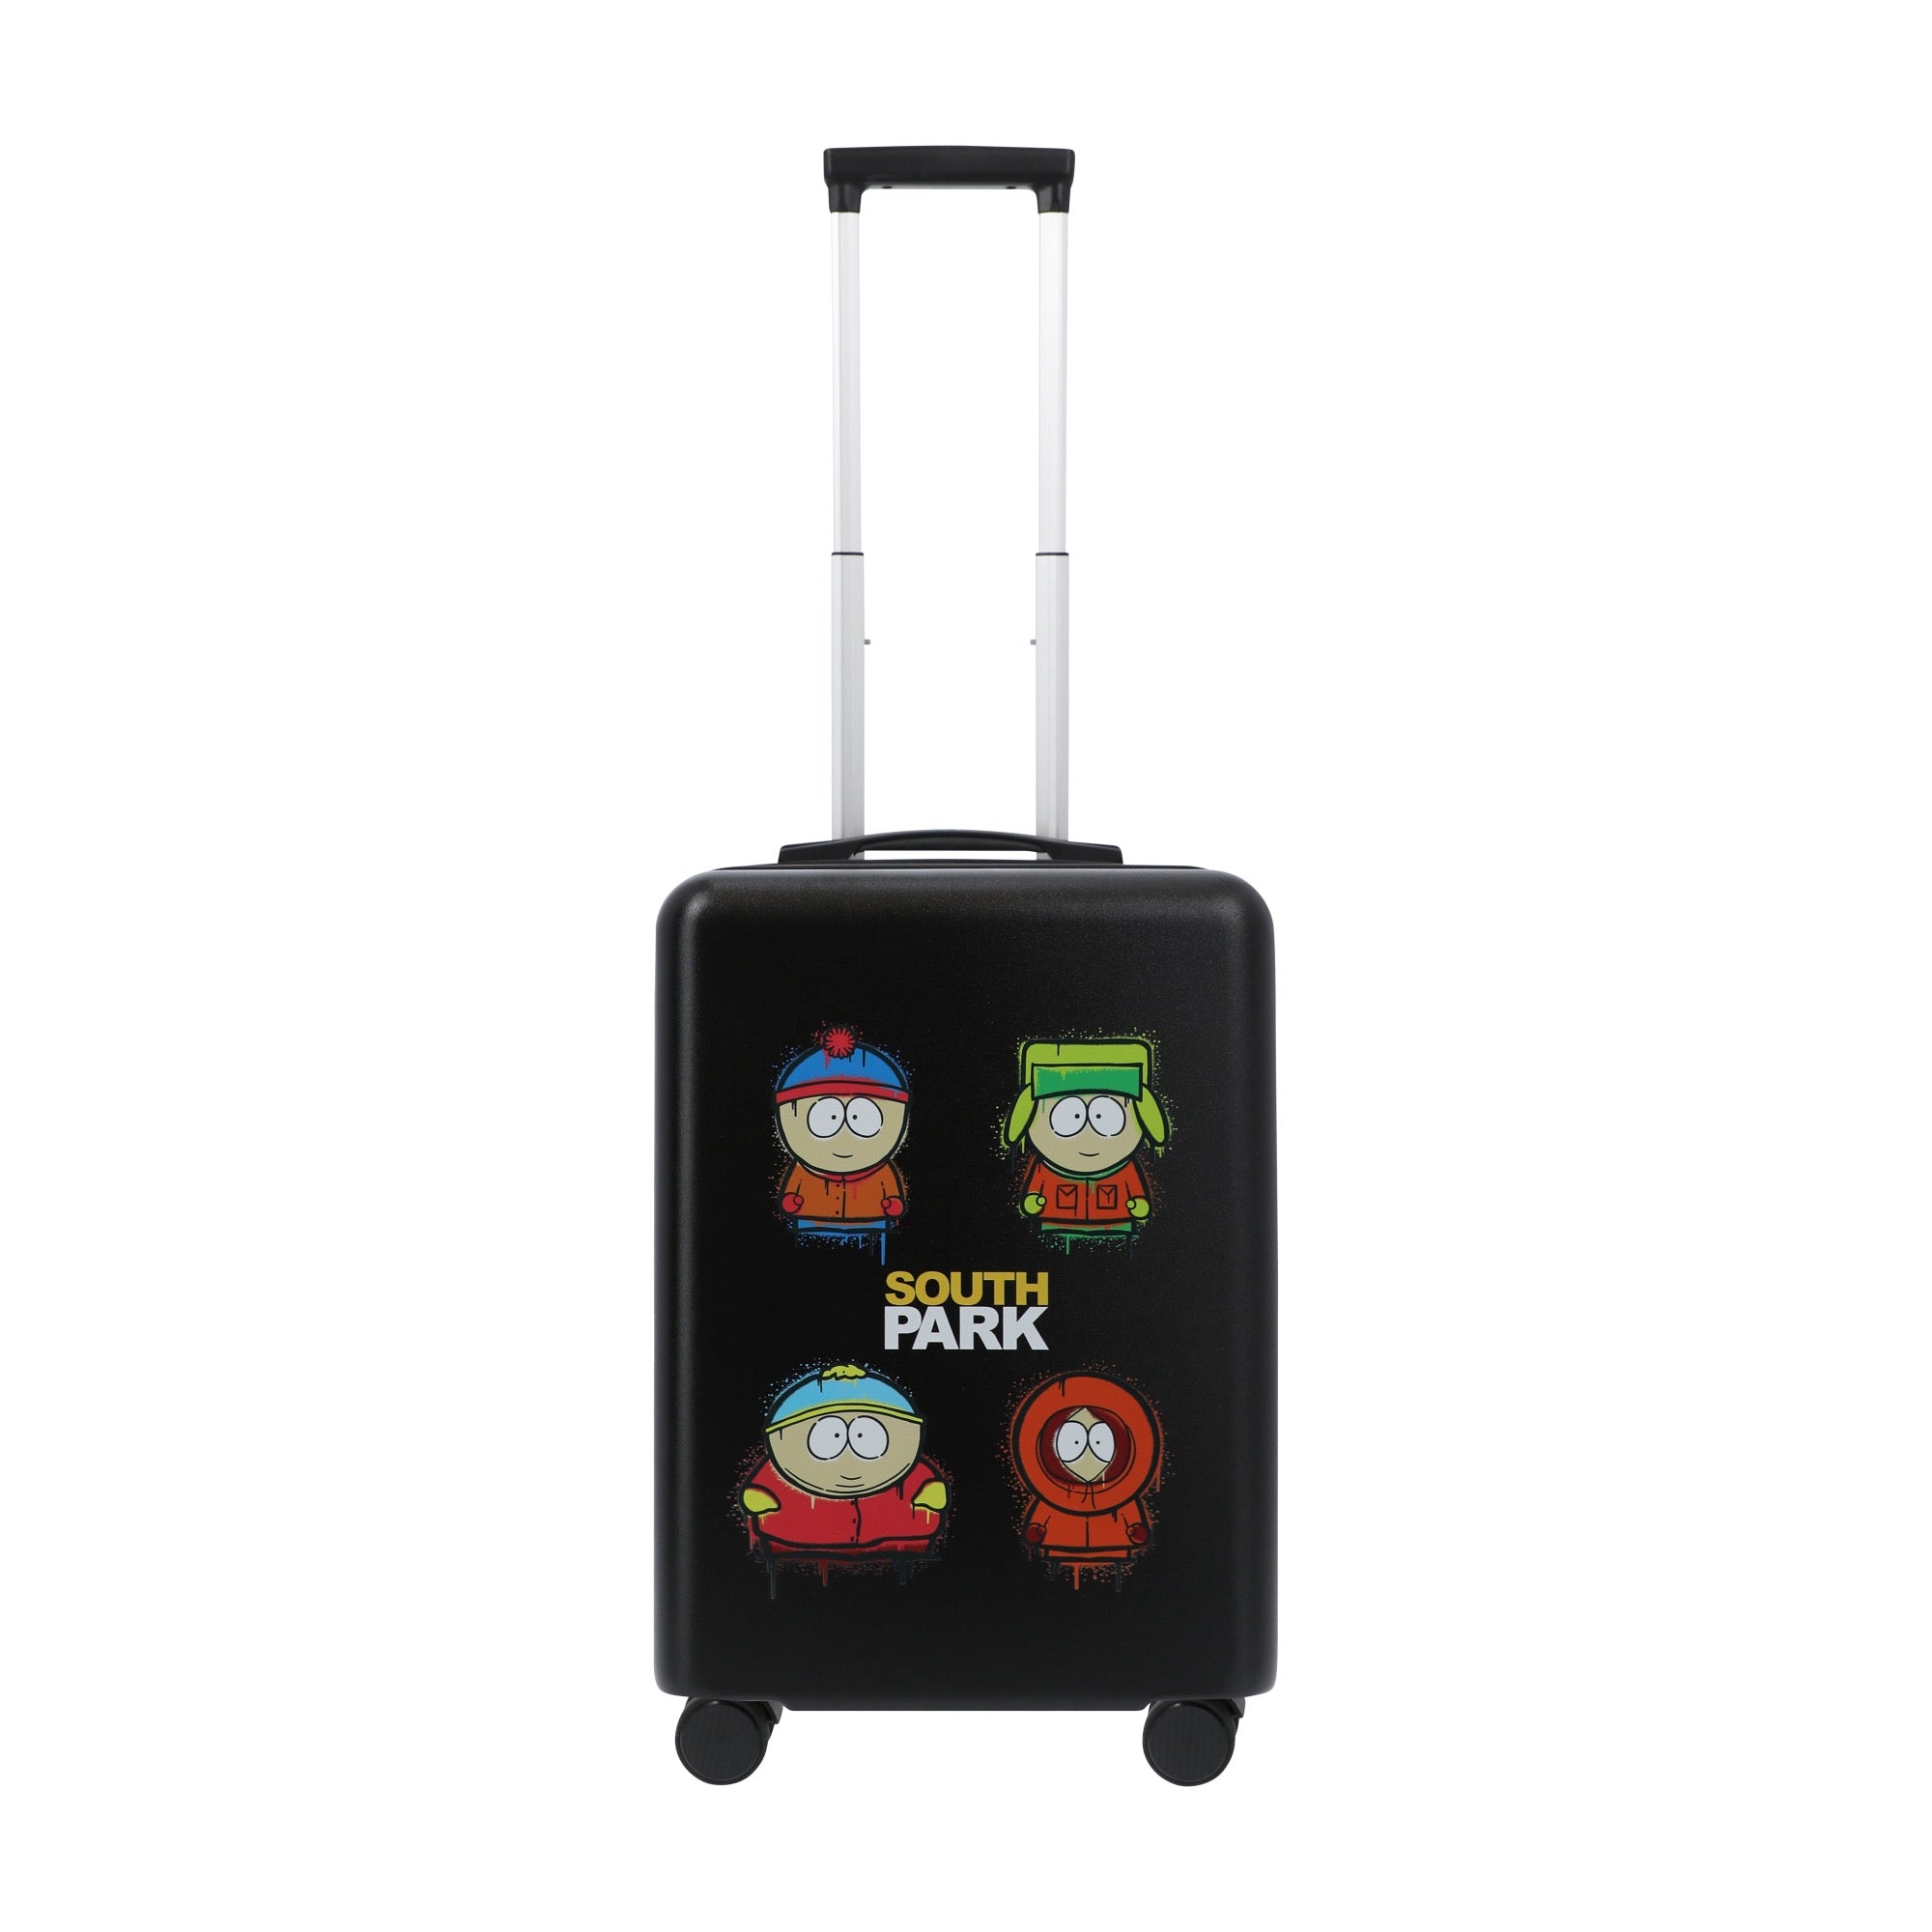 Black paramount south park 22.5" carry-on spinner suitcase luggage by Ful